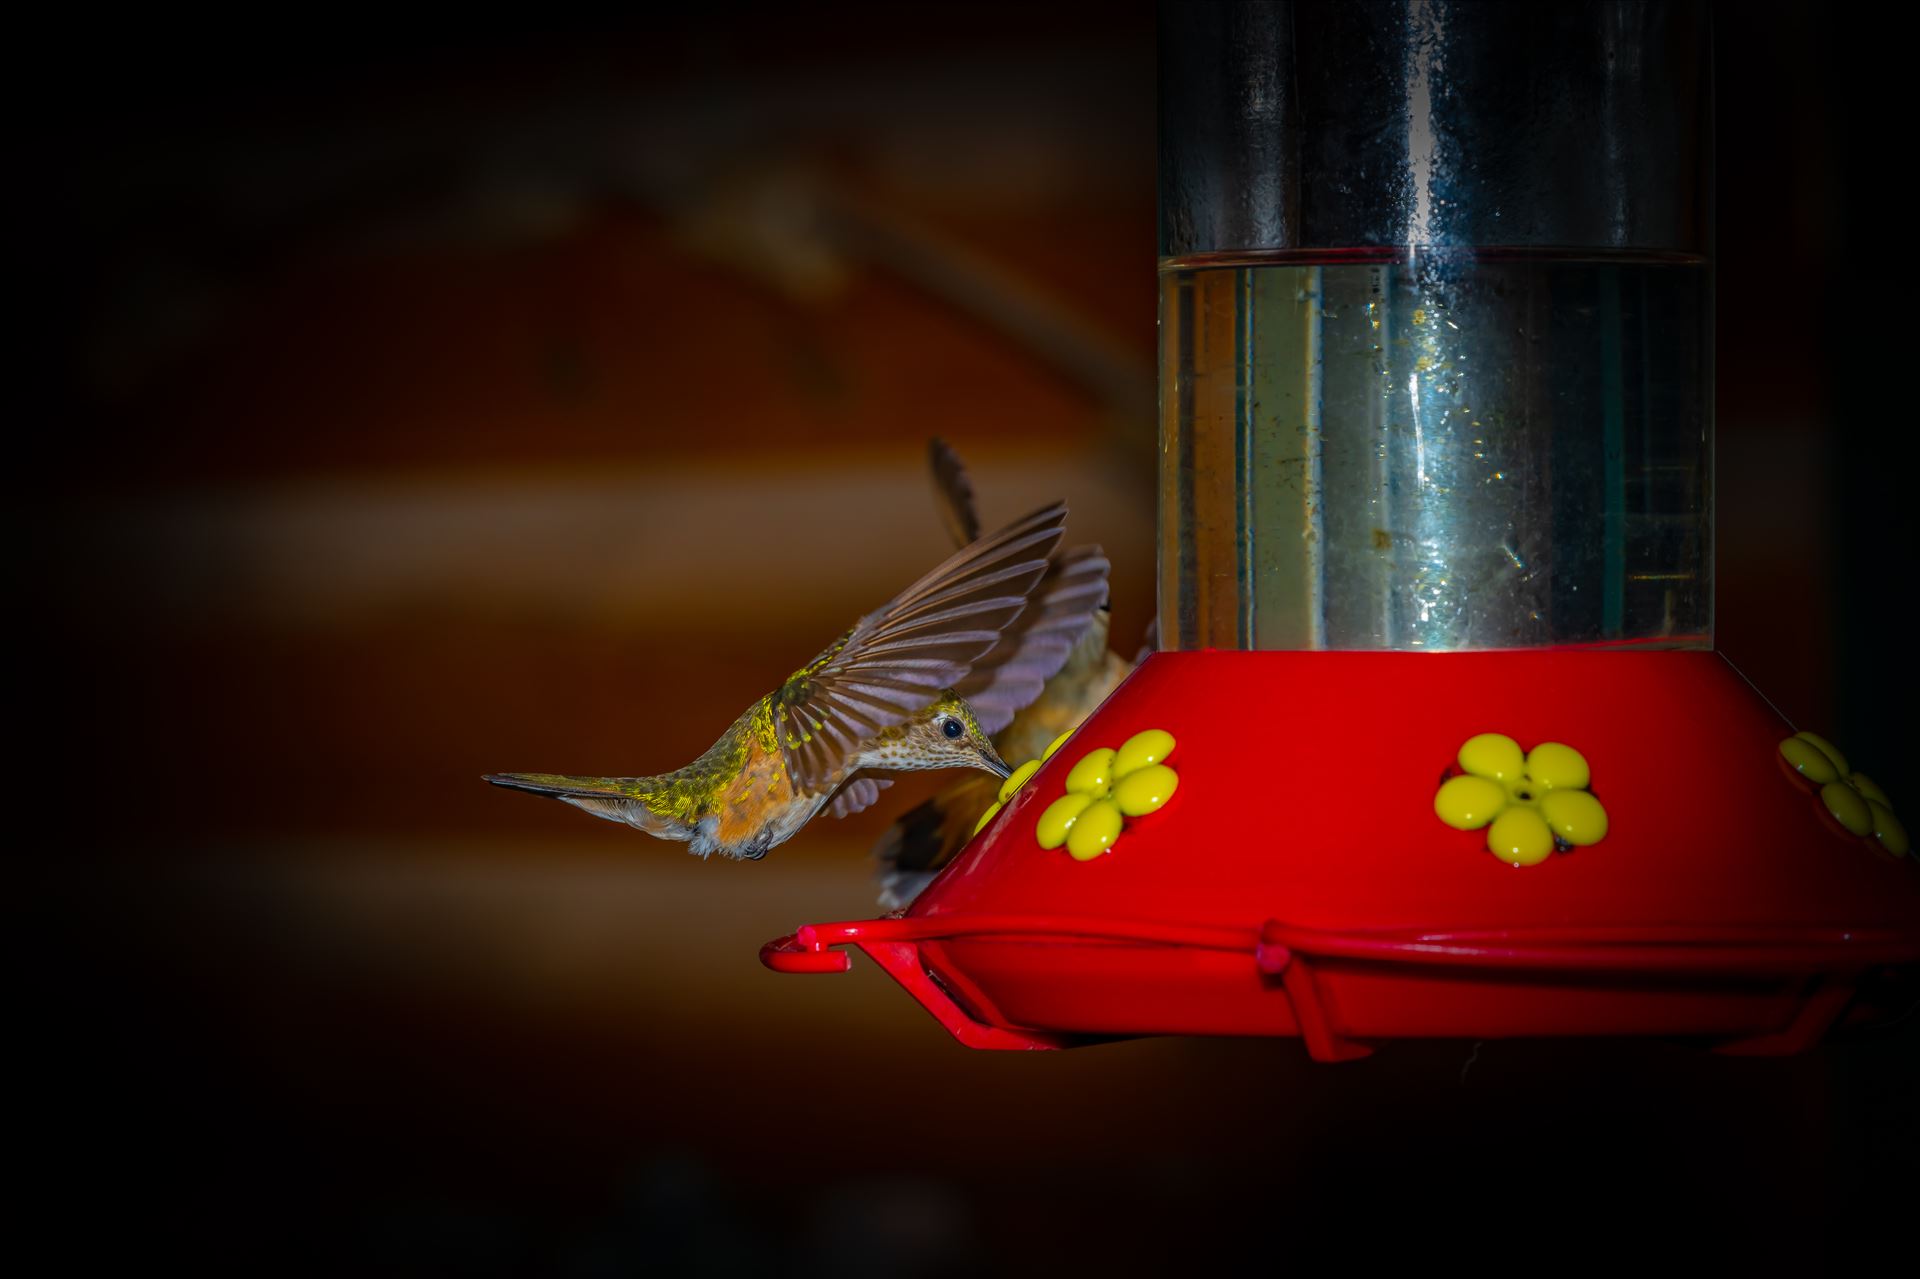 hummingbird at feeder 8500634 as ss sf.jpg Hummingbird drinking sugar water from feeder. Cloudcroft New Mexico, Lincoln National Forest by Terry Kelly Photography